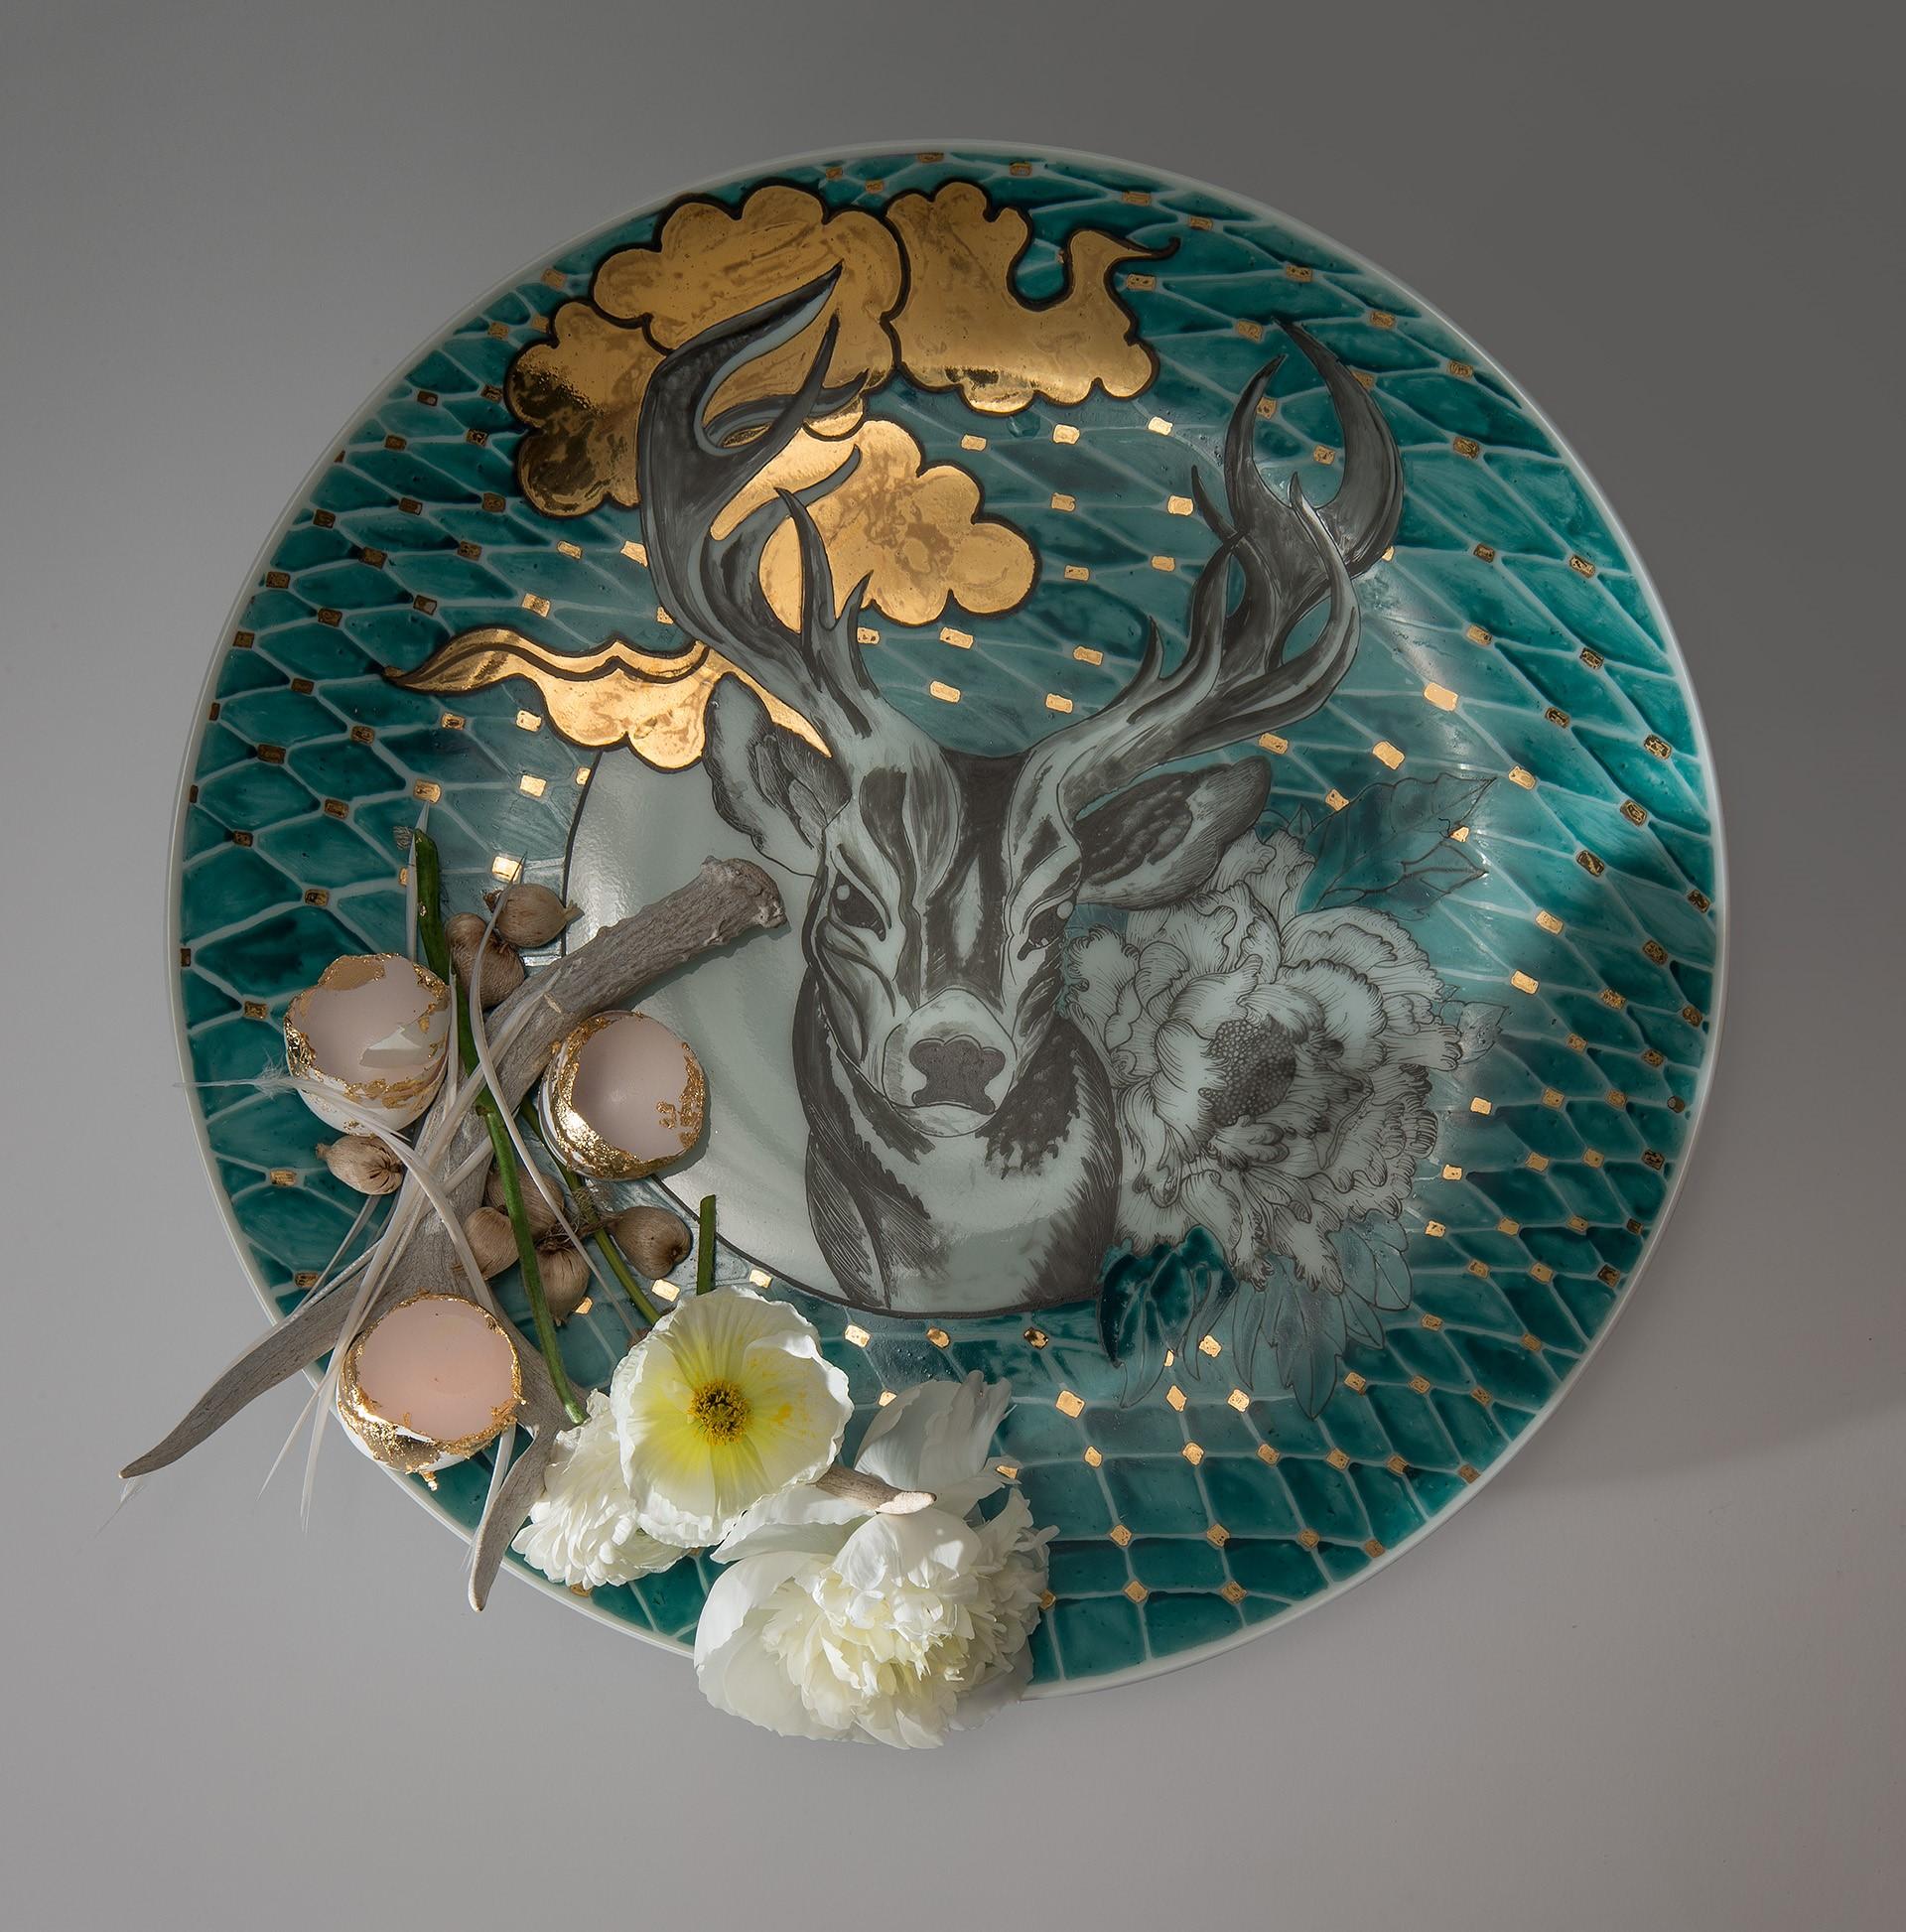  Plate with Antler, Flowers, Egg Shells, Onions and Fish (Memento Mori)